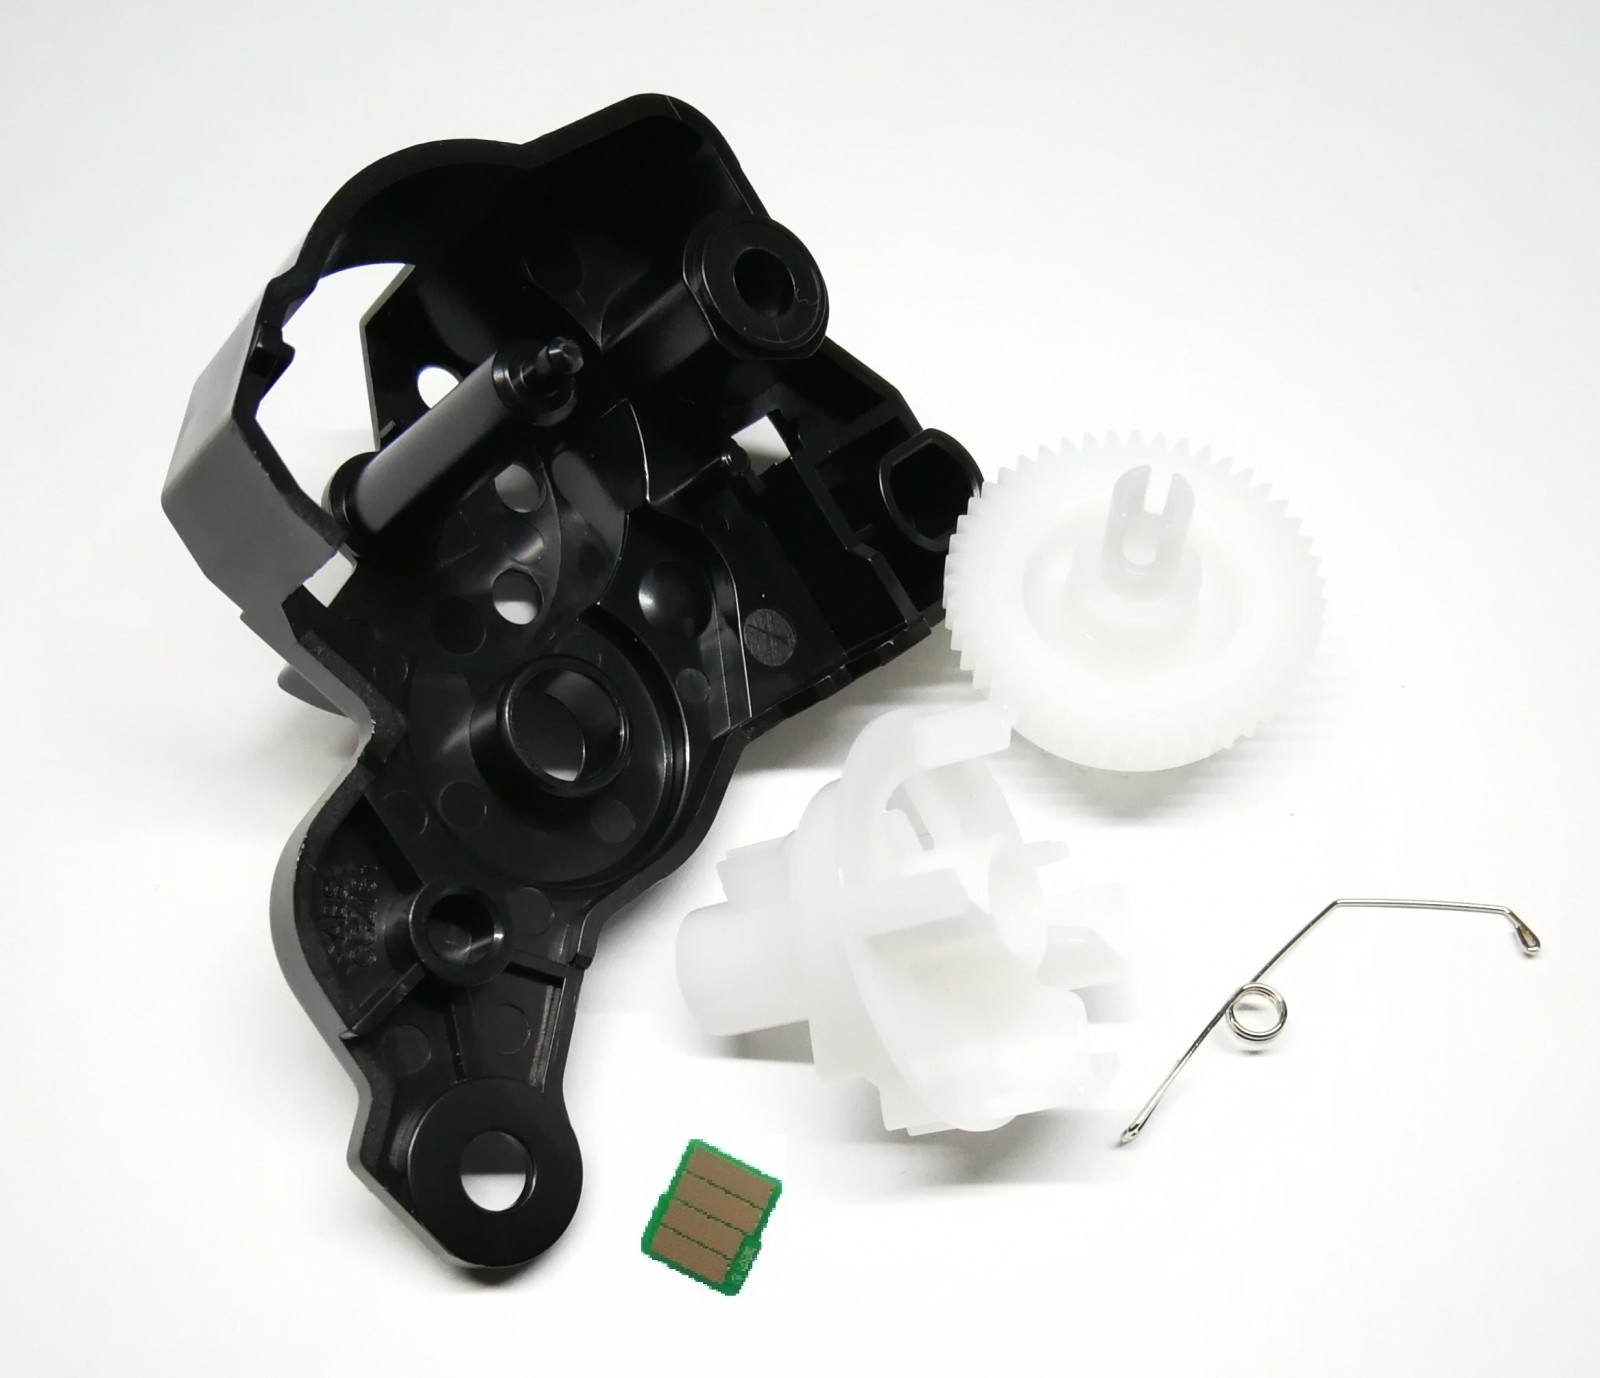 RESET KIT TN2420: RESET GEAR, SPRING, SIDE COVER AND CHIP